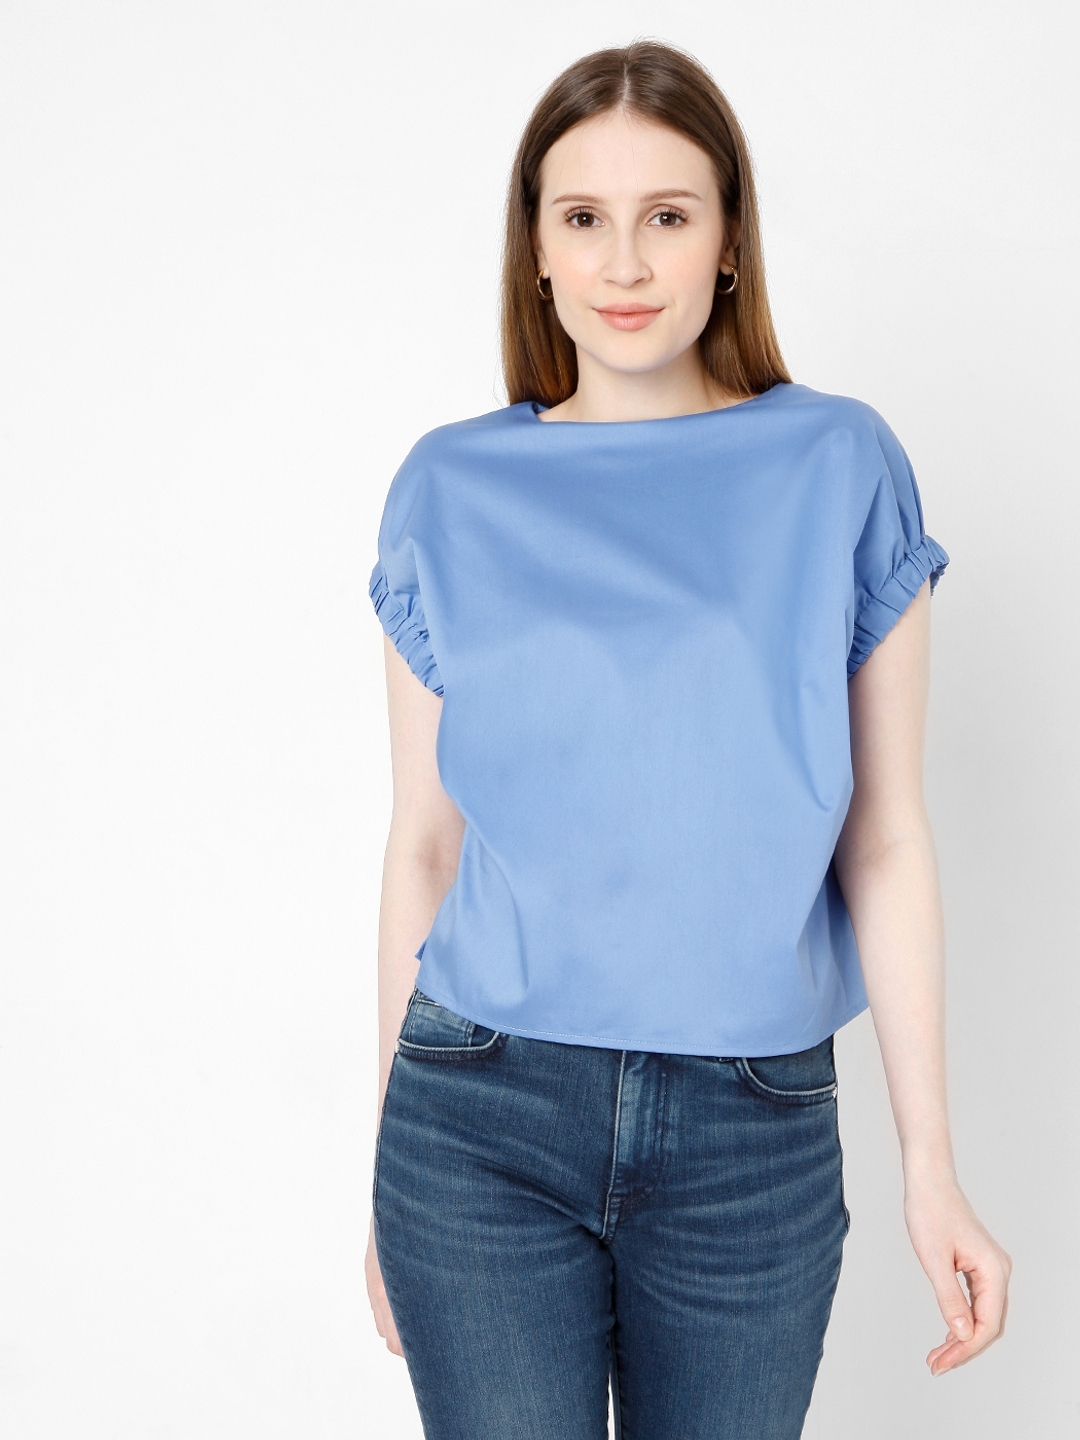 Buy LIFE Ice Blue Embroidered Cotton Round Neck Women's Regular T-Shirt |  Shoppers Stop